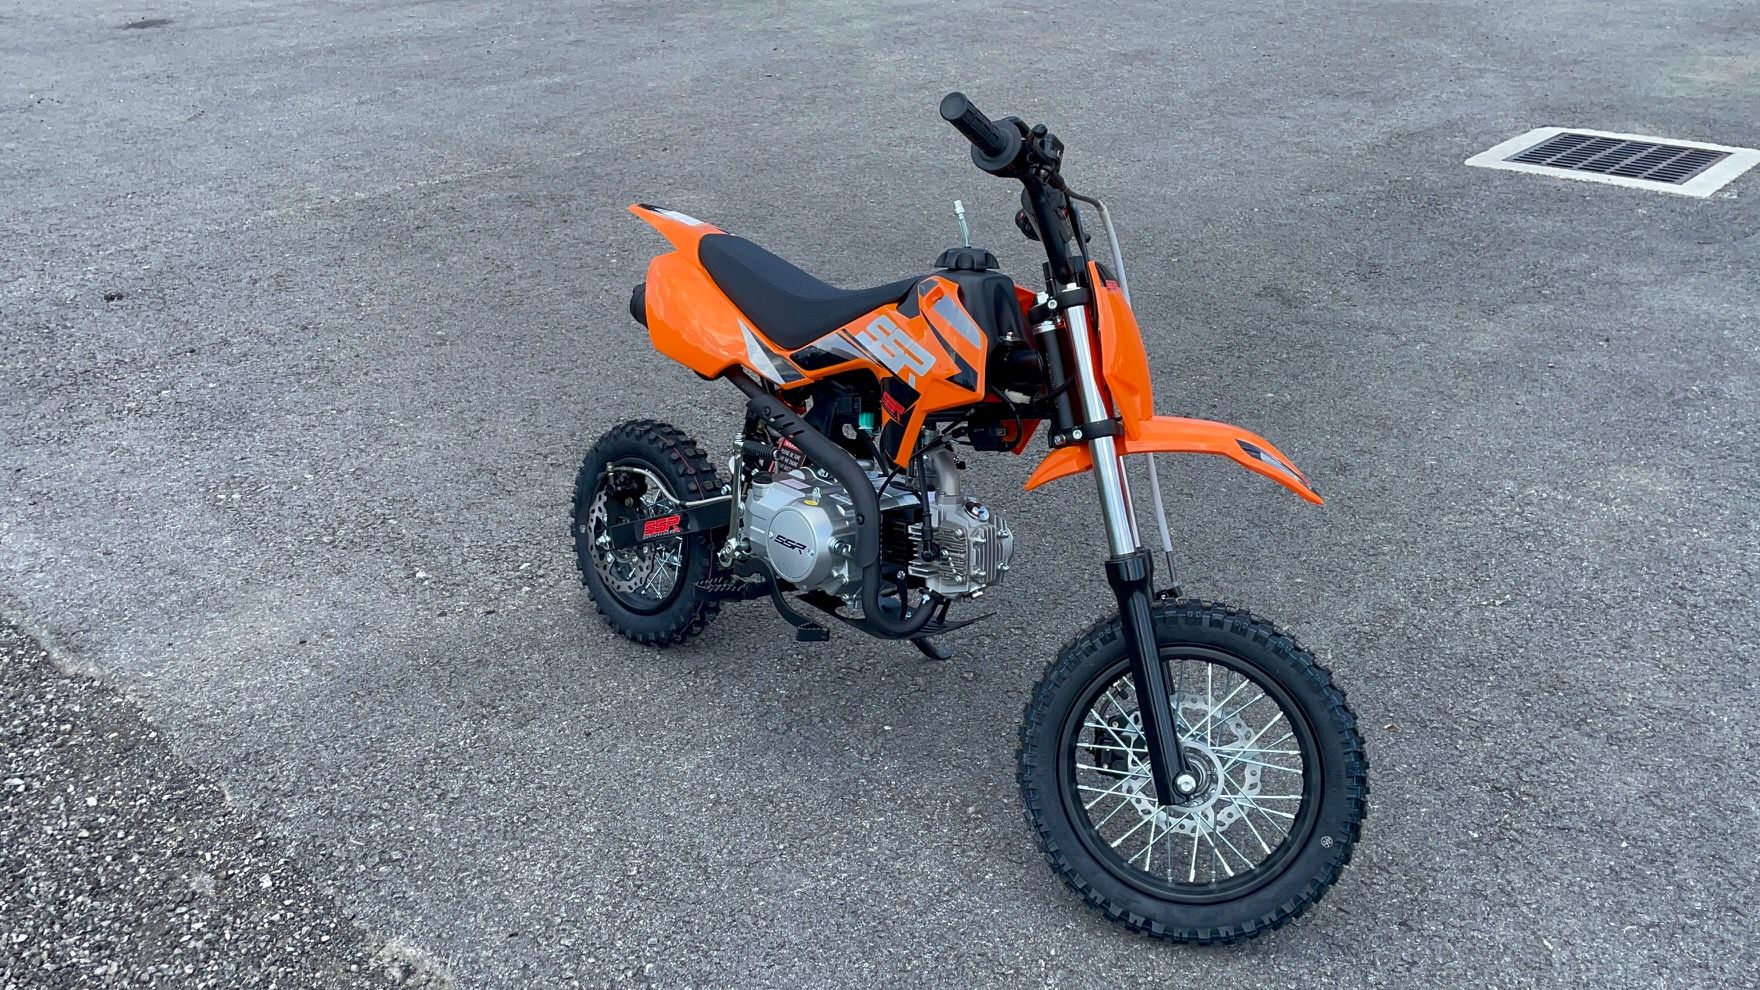 2022 SSR Motorsports SR110 in South Wales, New York - Photo 8